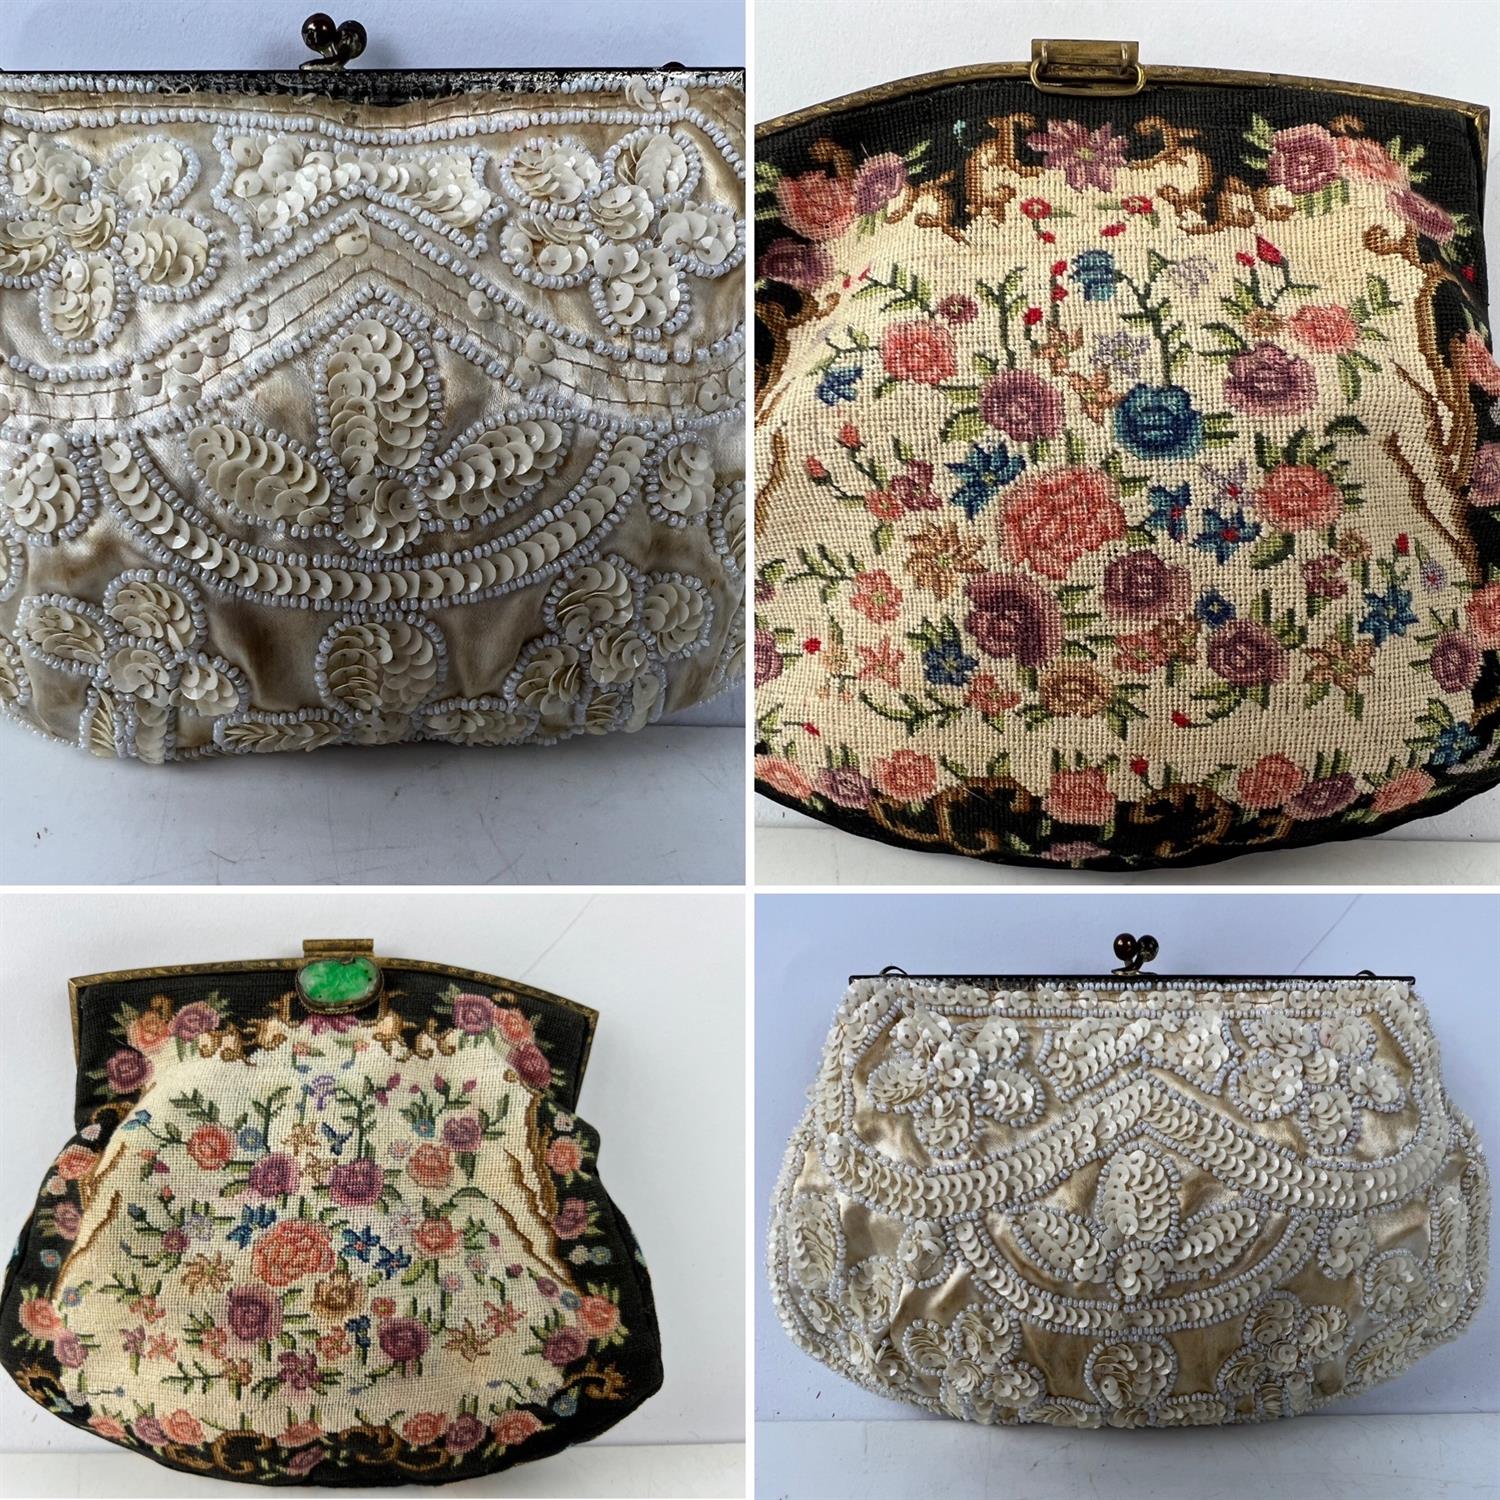 Two Art Deco evening bags one in petit point floral pattern with pale gold satin lining and curved